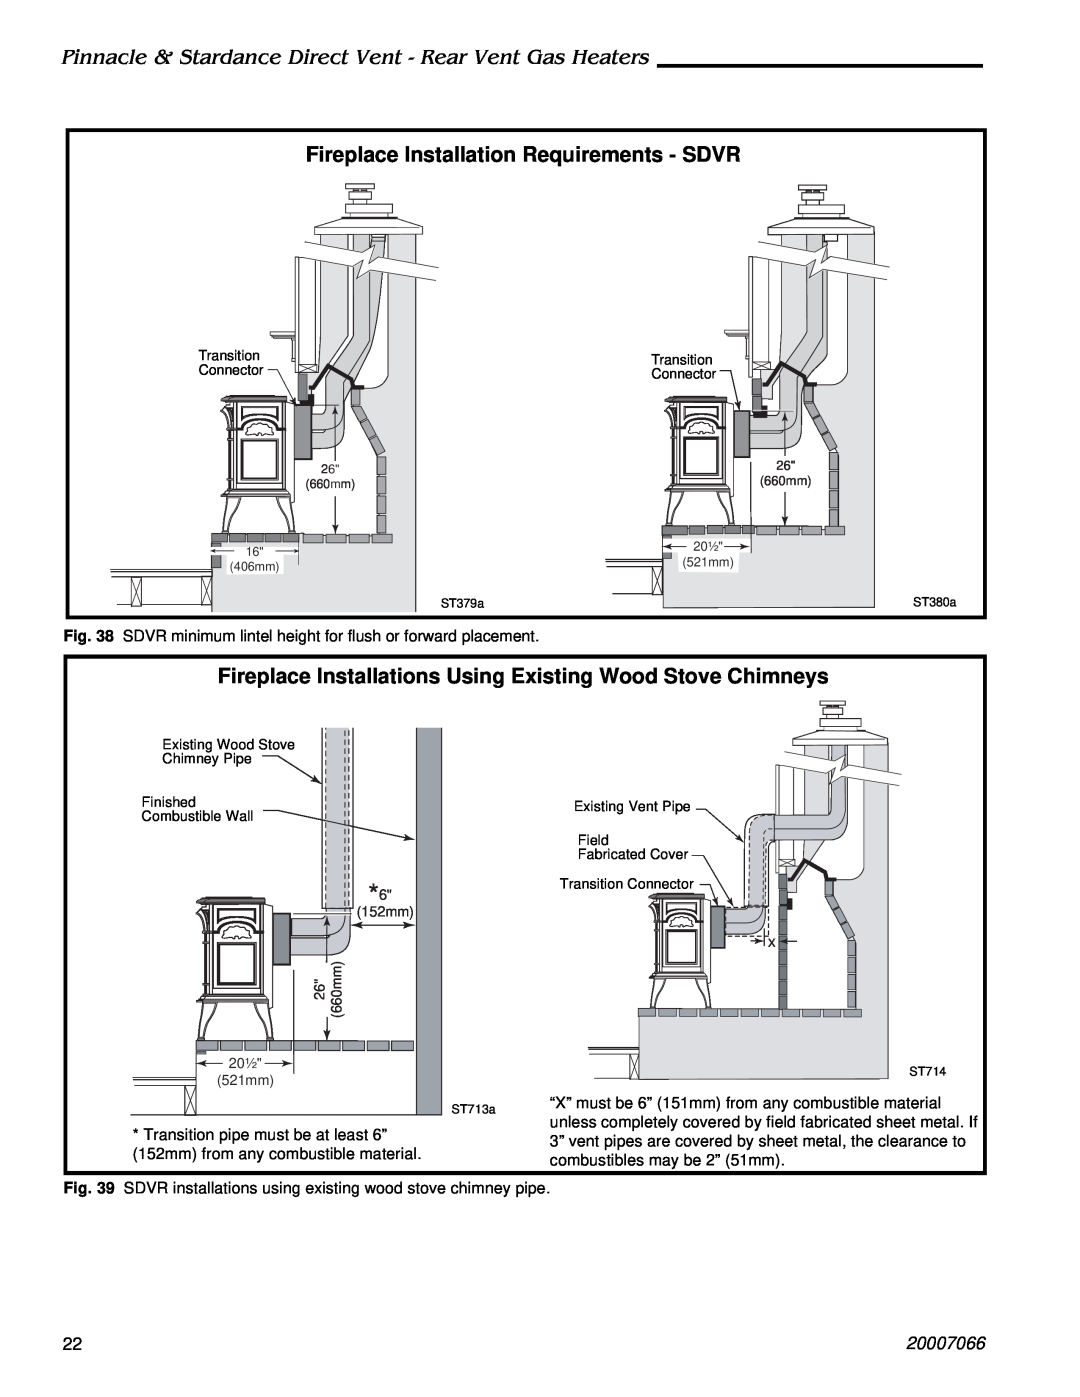 Vermont Casting 3936 Fireplace Installation Requirements - SDVR, Pinnacle & Stardance Direct Vent - Rear Vent Gas Heaters 